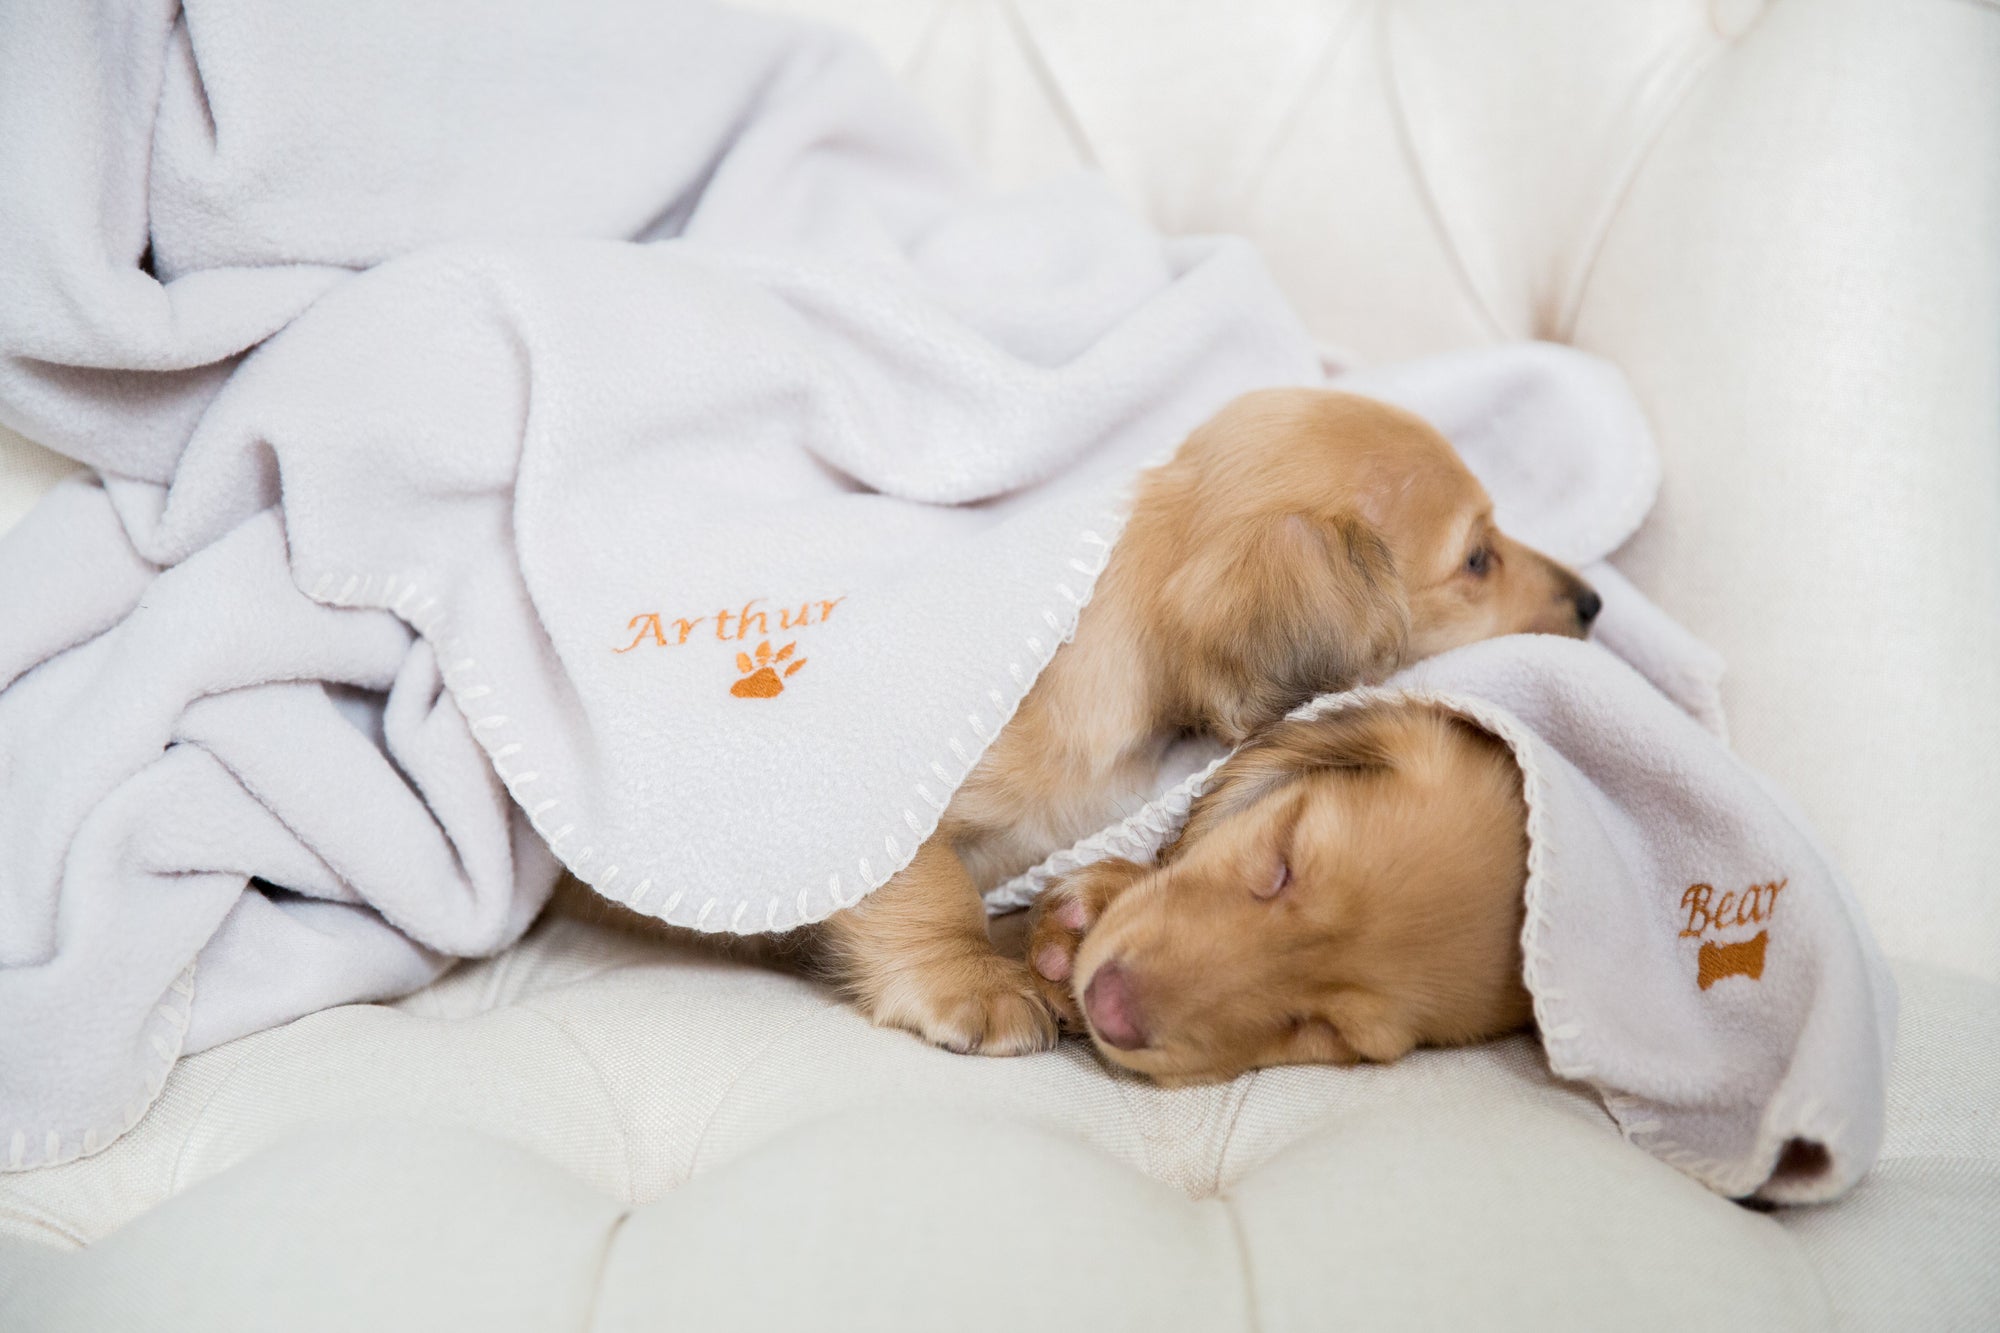 Two adorable puppies cuddling together under a cosy blanket.